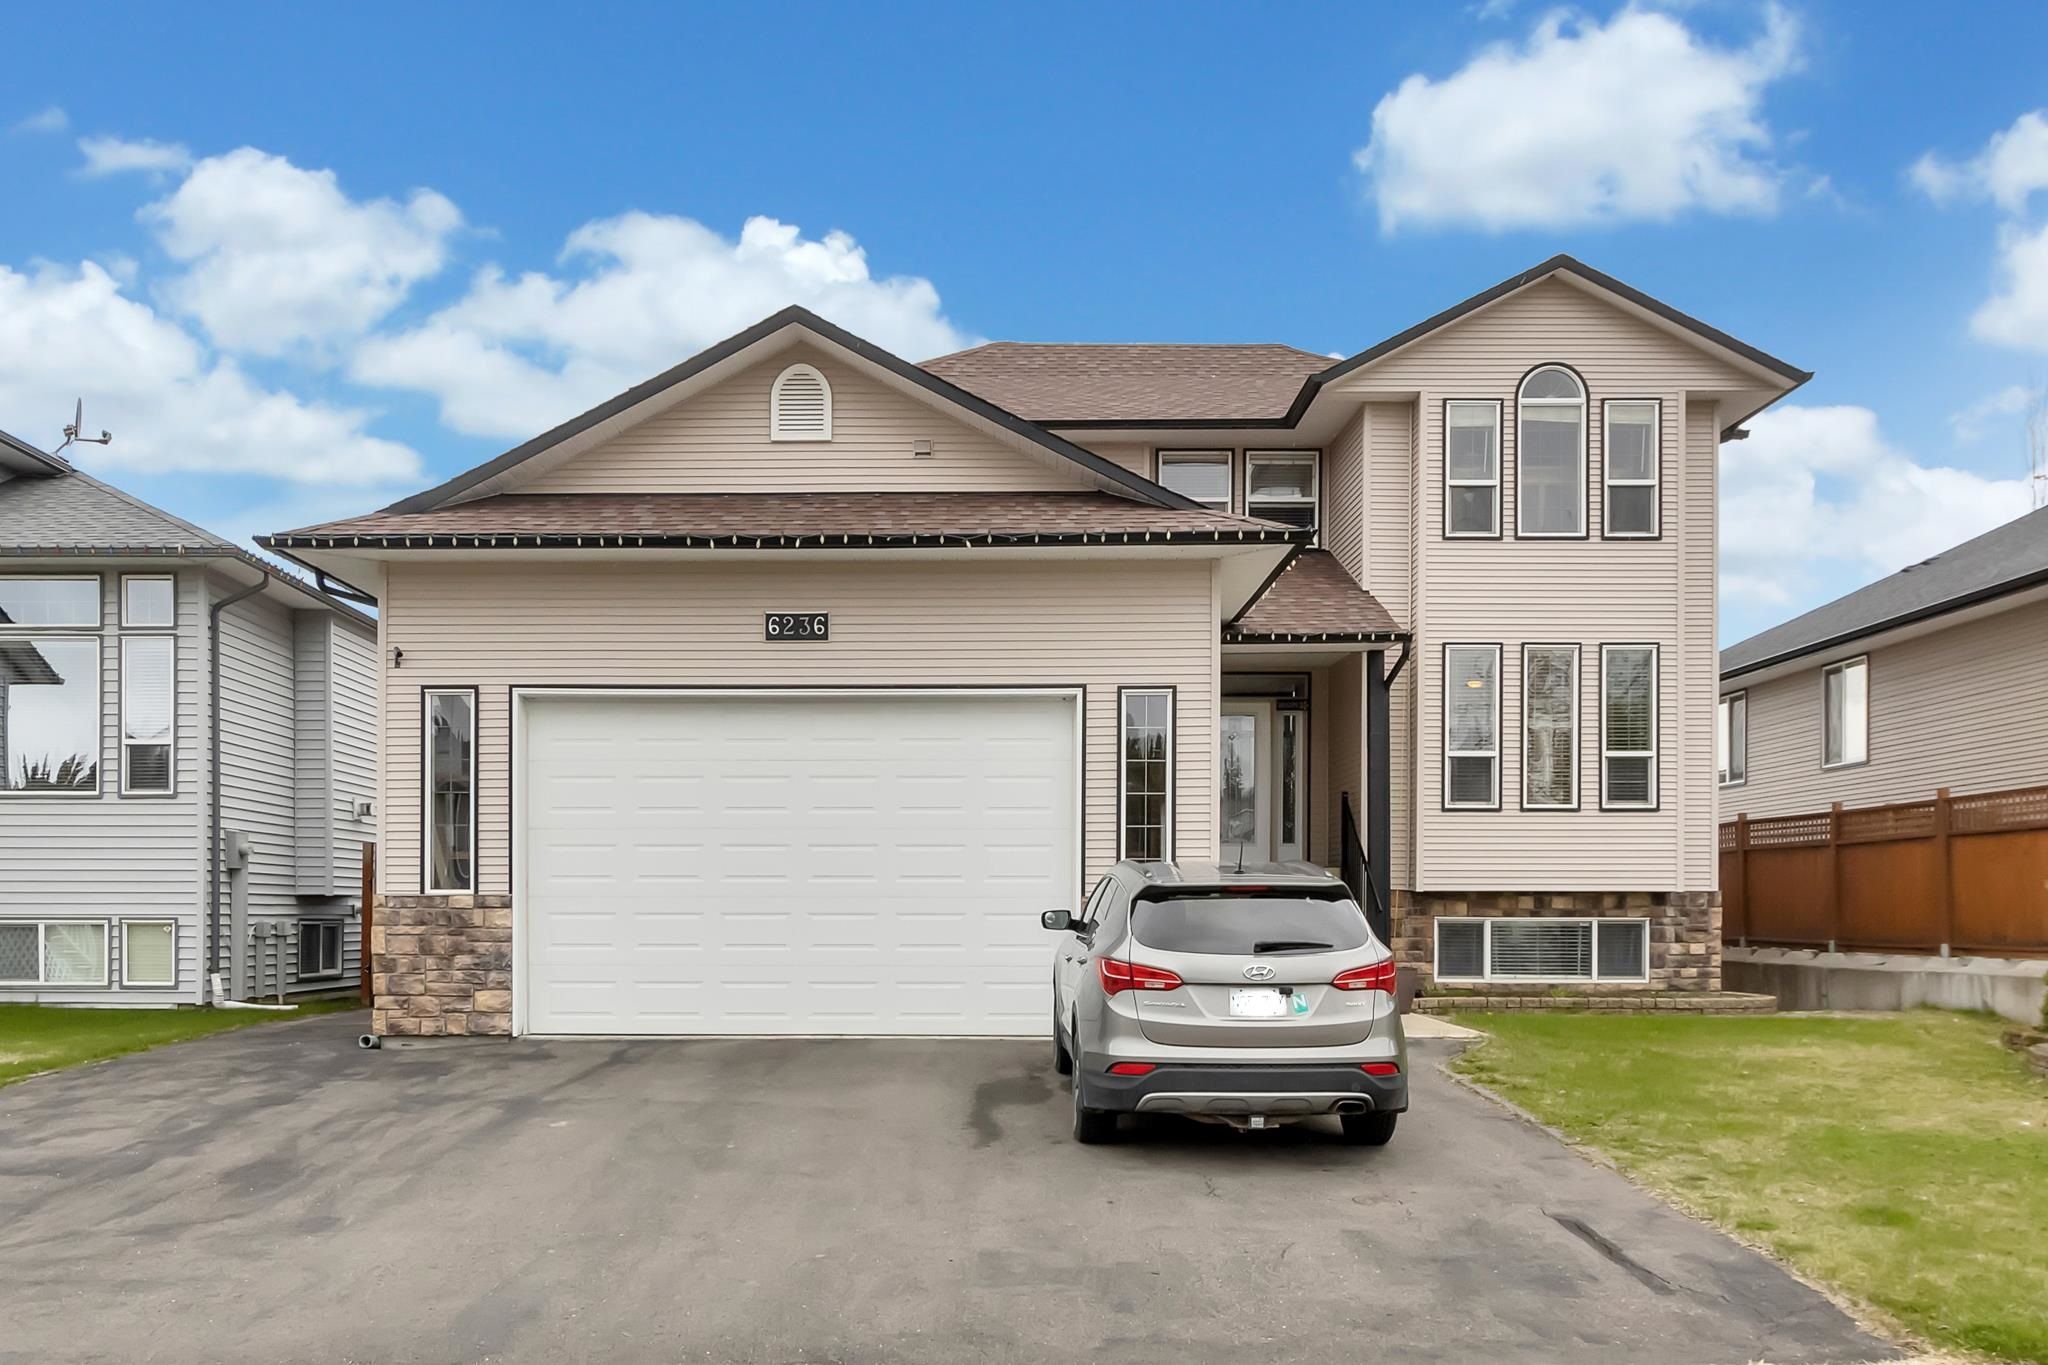 Open House. Open House on Sunday, May 22, 2022 11:45AM - 1:00PM
Join Garnet Weston to view this beautiful family home.